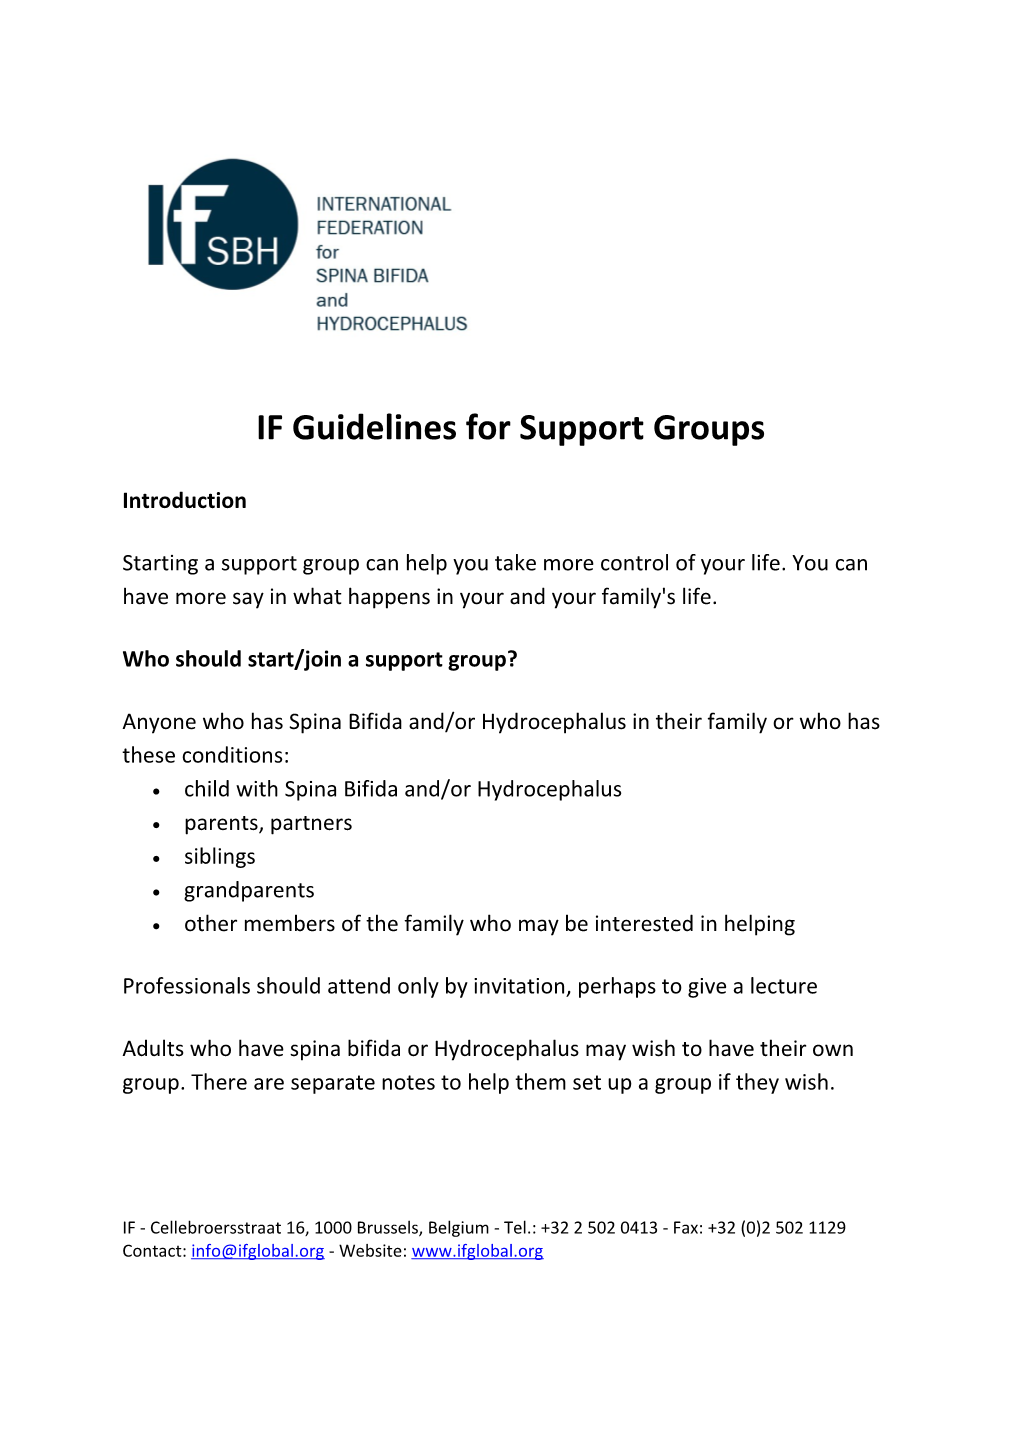 IF Guidelines for Support Groups